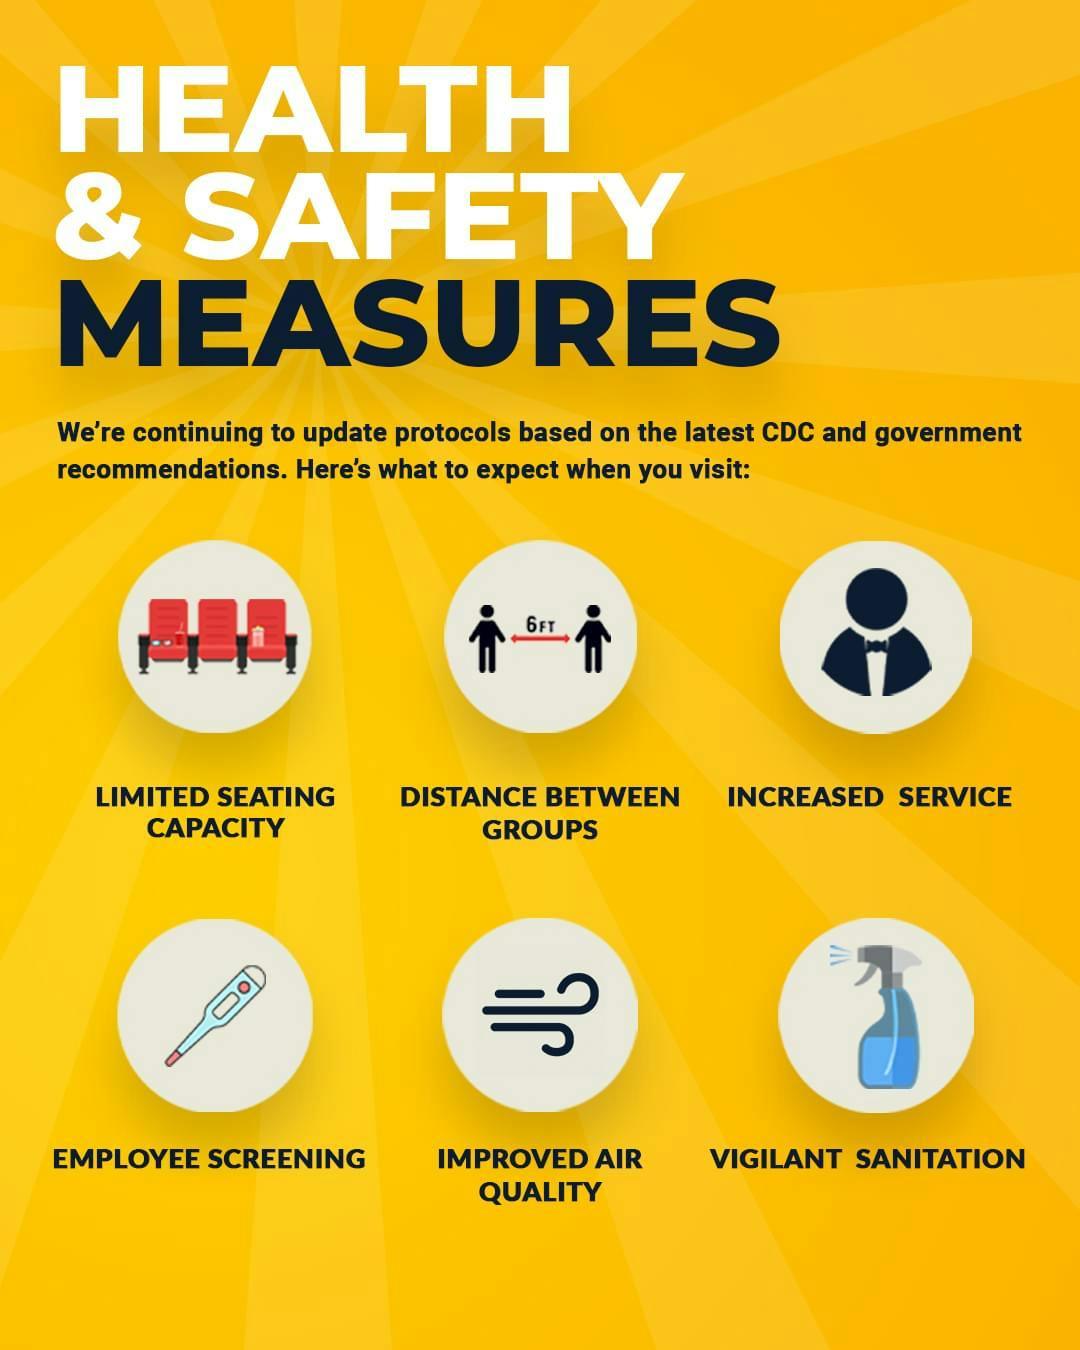 Health & Safety measures